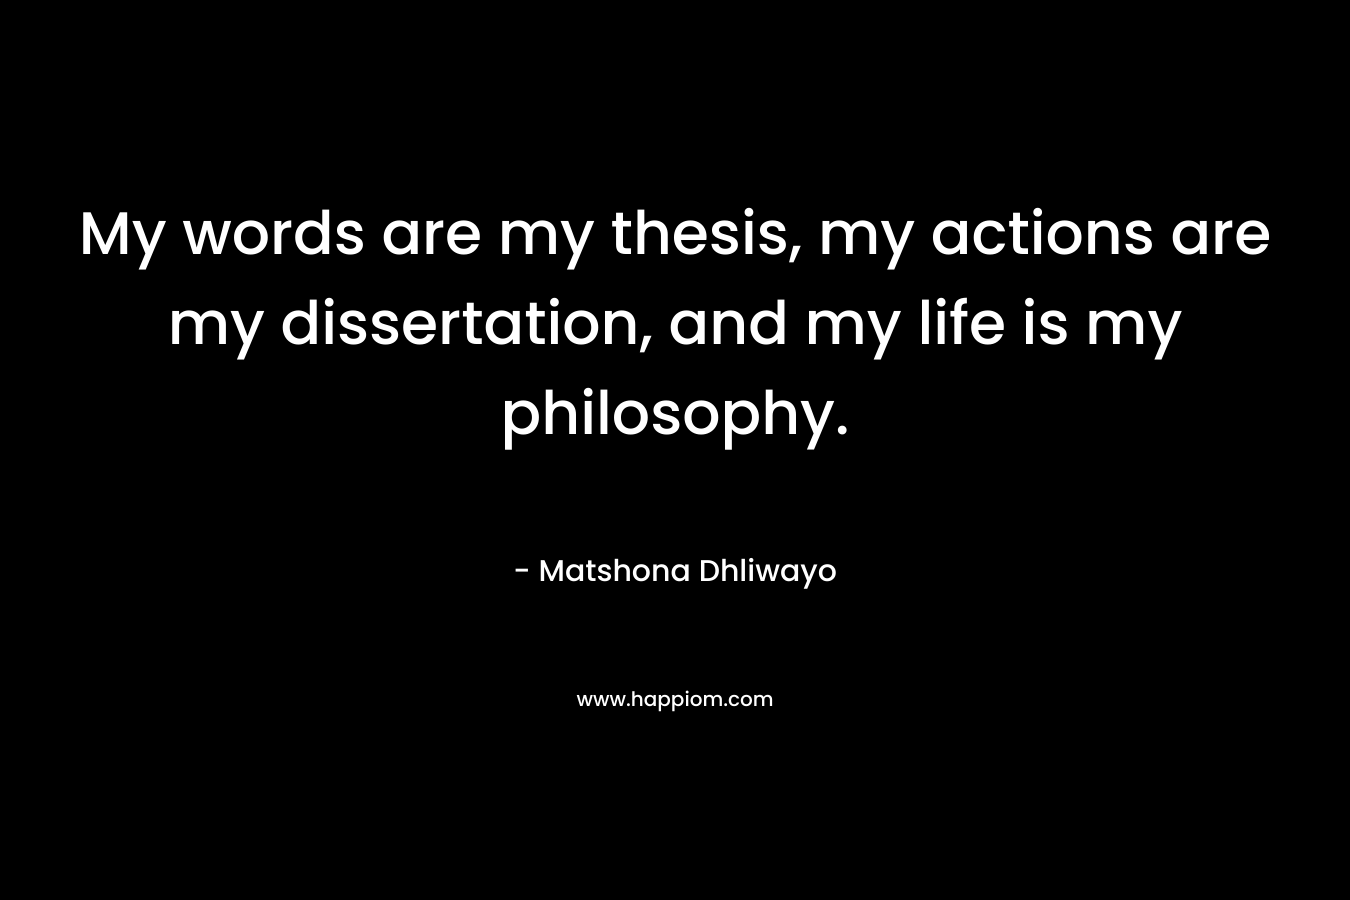 My words are my thesis, my actions are my dissertation, and my life is my philosophy. – Matshona Dhliwayo